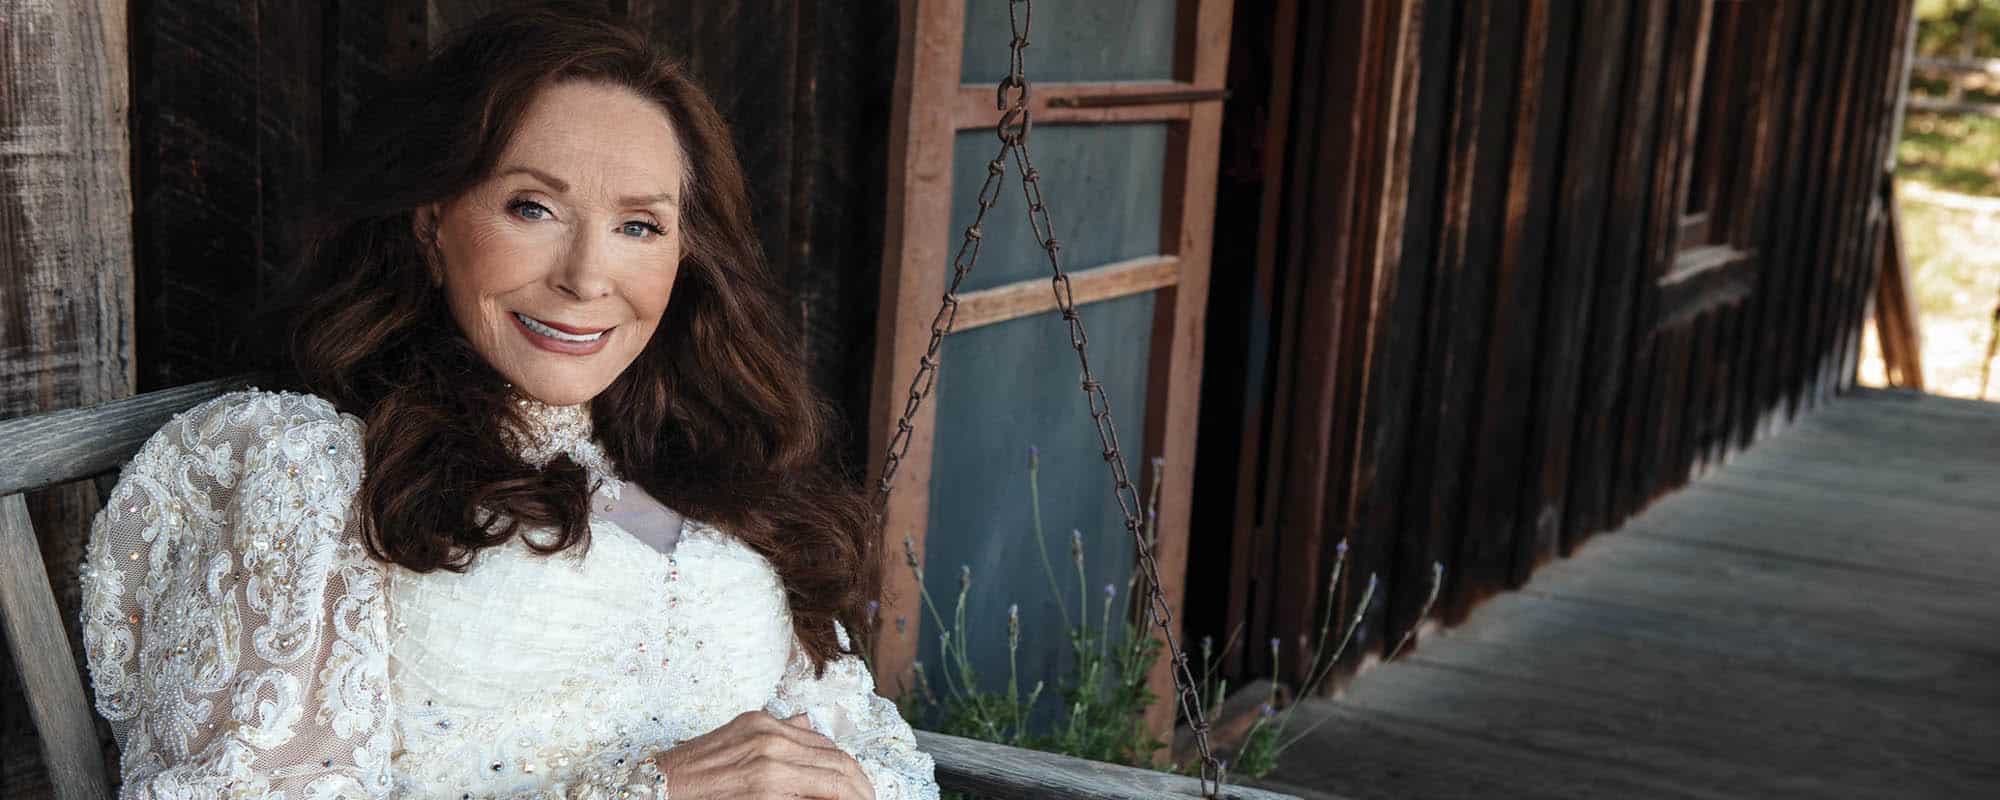 Behind the Meaning and History of “Portland Oregon” by Loretta Lynn and Jack White